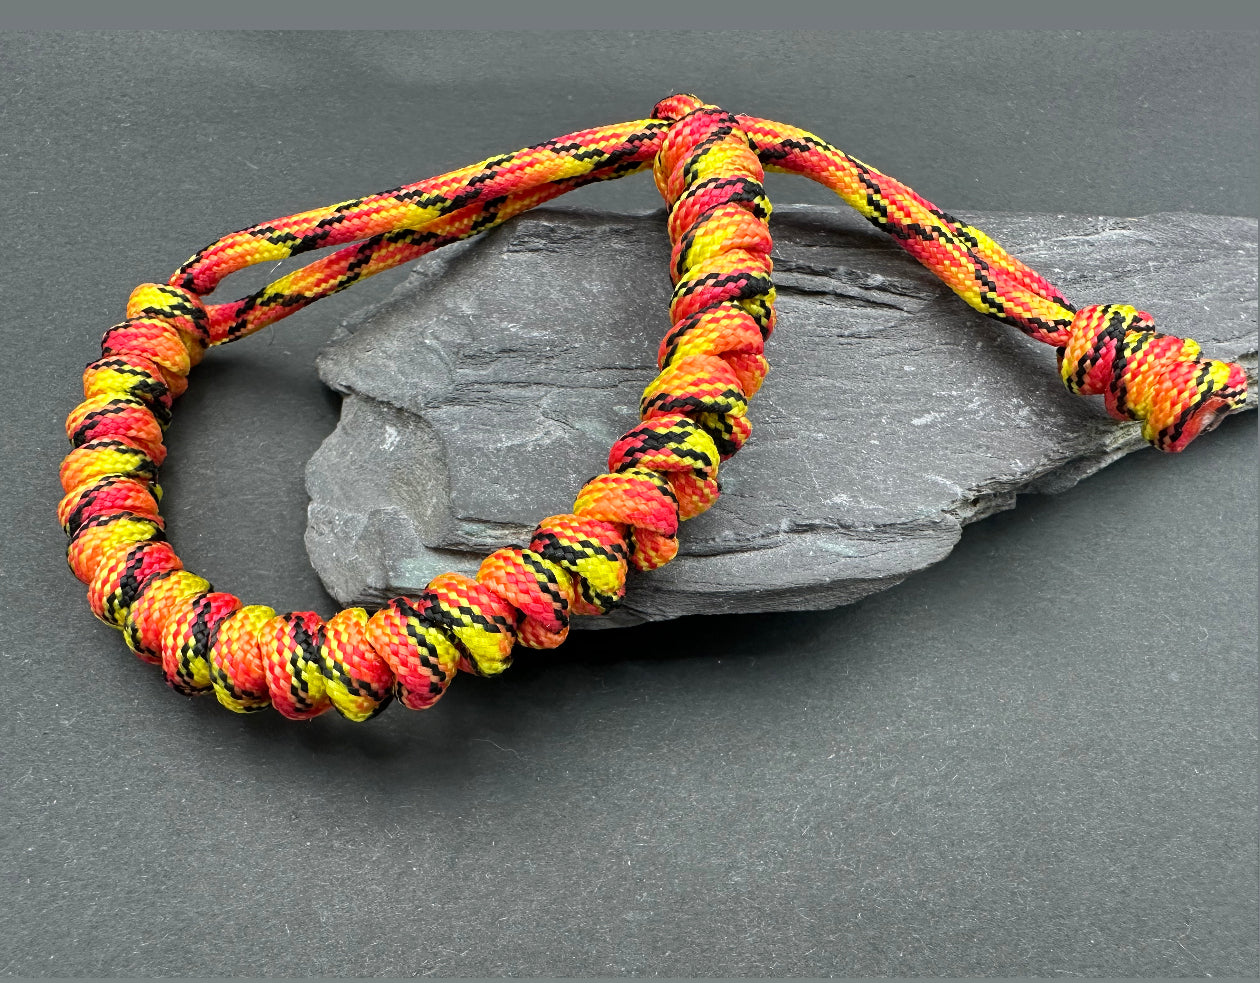 Paracord survival bracelets in the Fireball colour, (red yellow orange mix) the item is lightweight comfortable and handmade in a snake knott tactical design U.K.